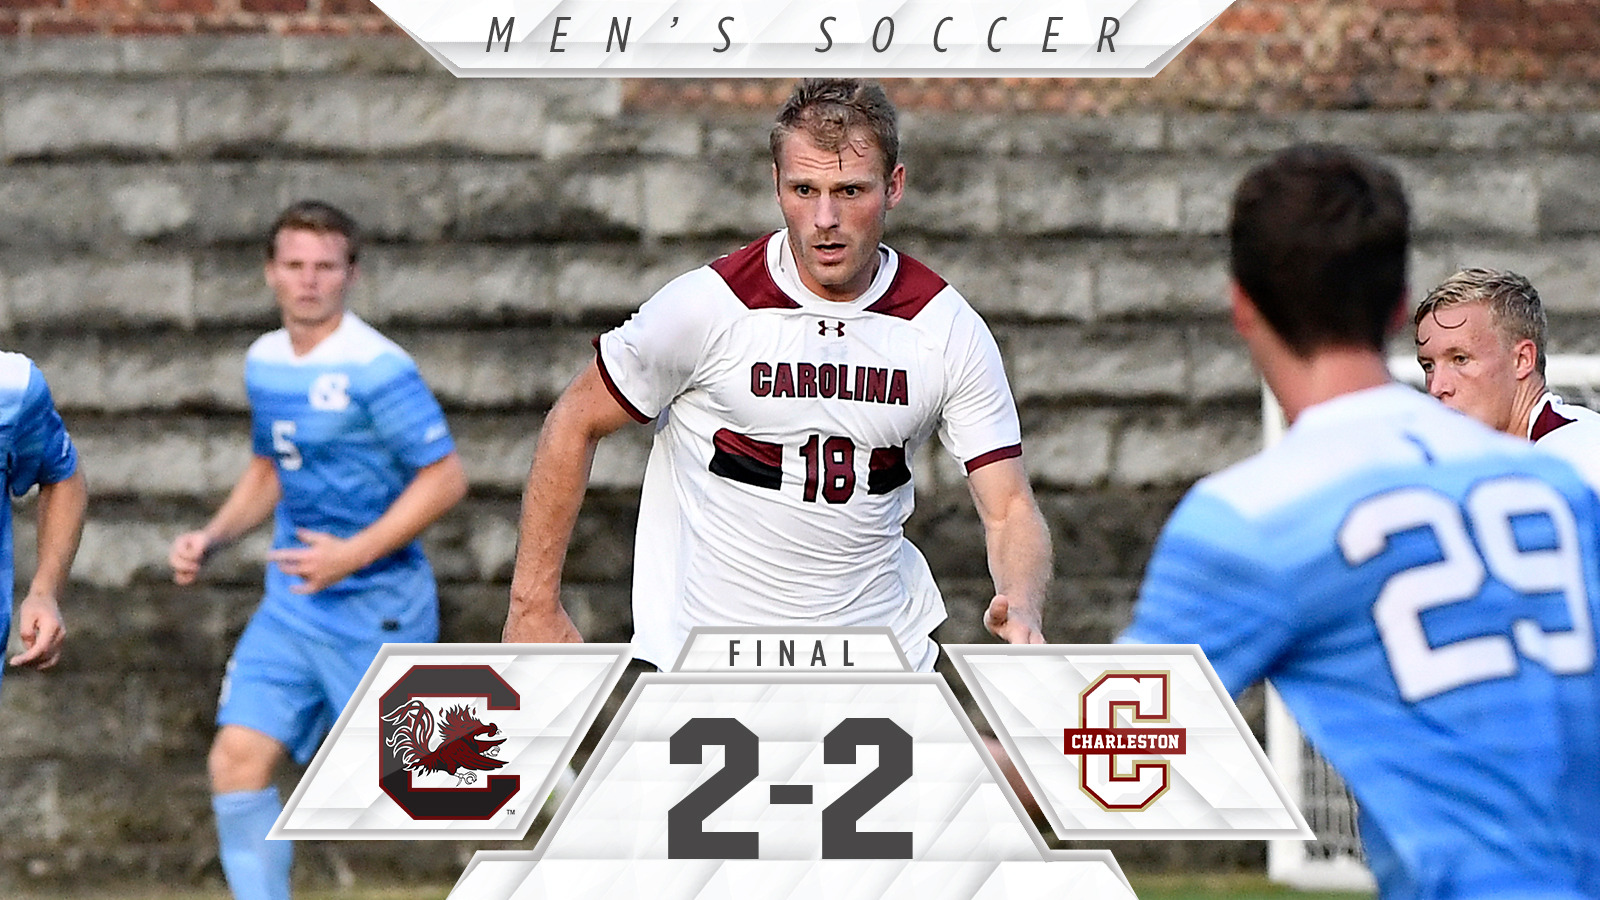 Carolina Draws With CofC 2-2 In Final Exhibition